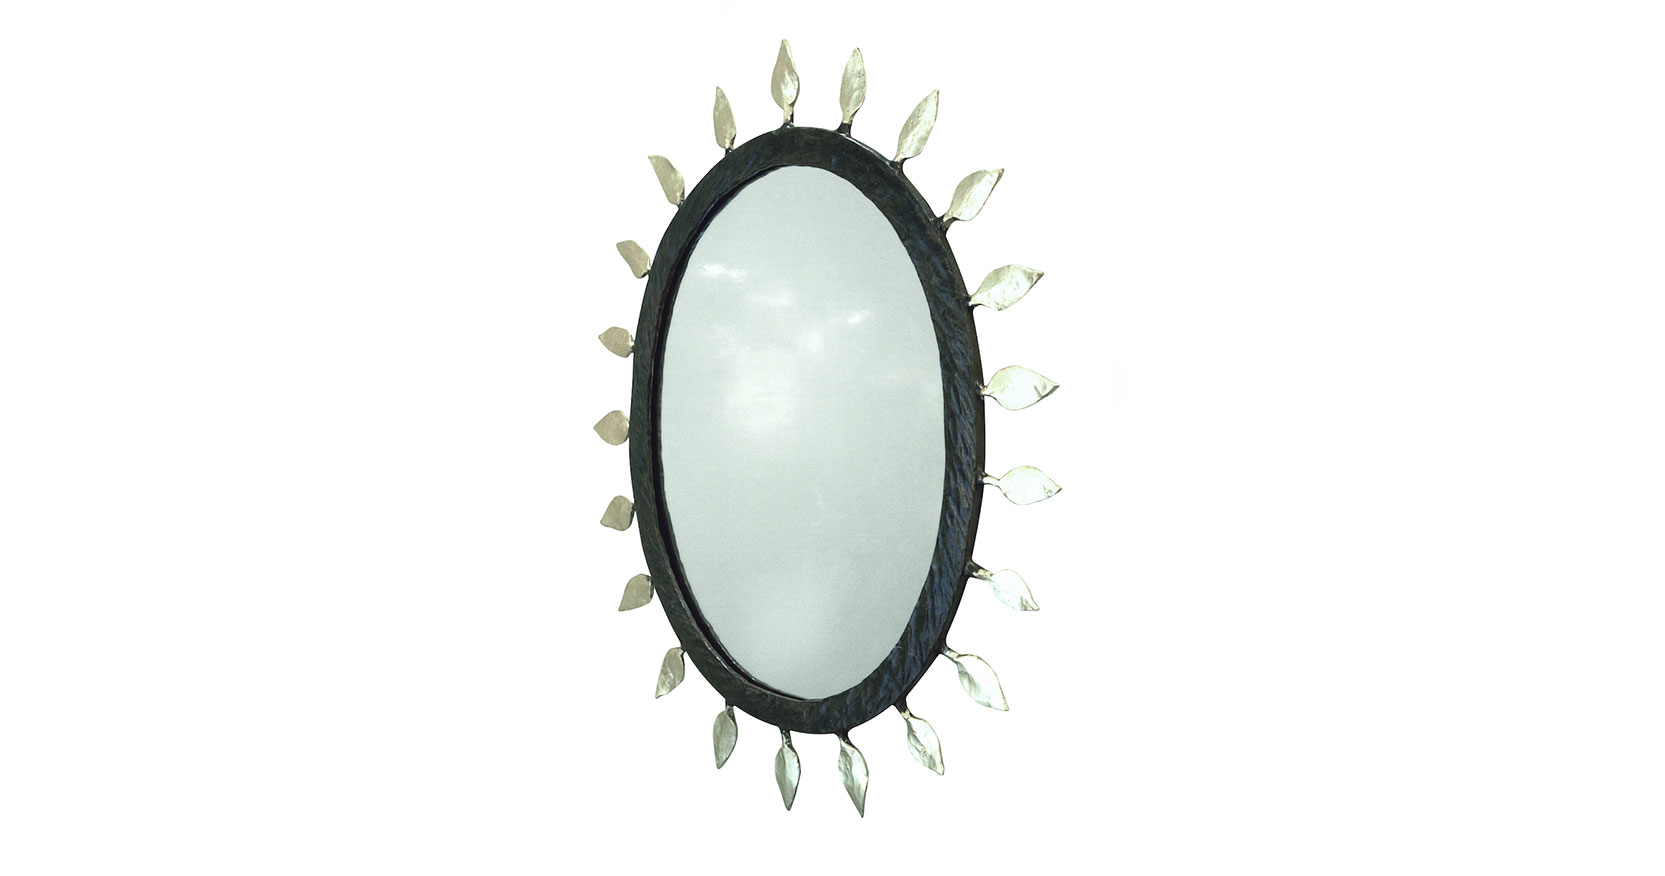 Garouste Bonetti, oval mirror in wrought iron with a brown frame surrounded by silvered leaves.